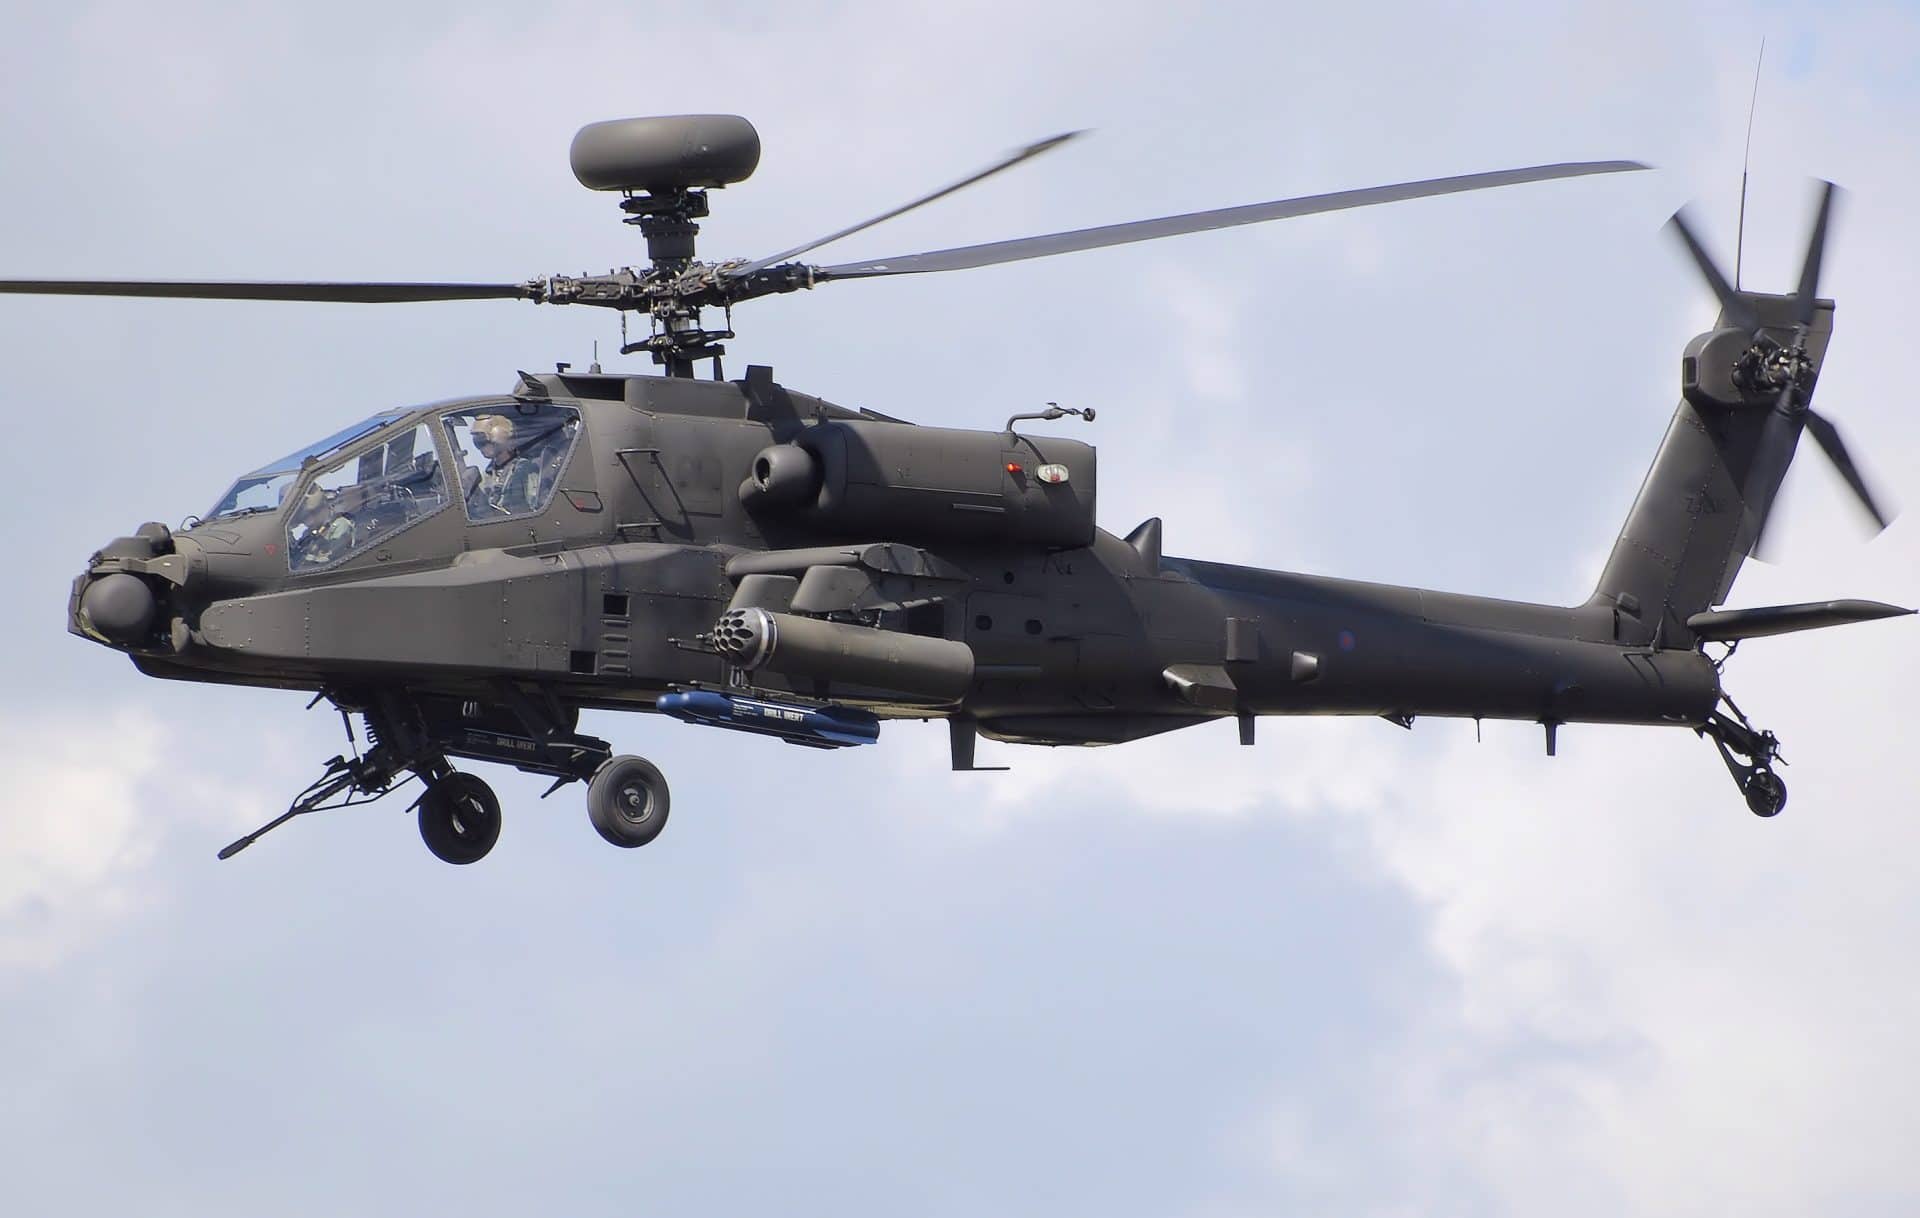 Boeing Delivers 2 500th Ah 64 Apache Helicopter Aviation24 Be